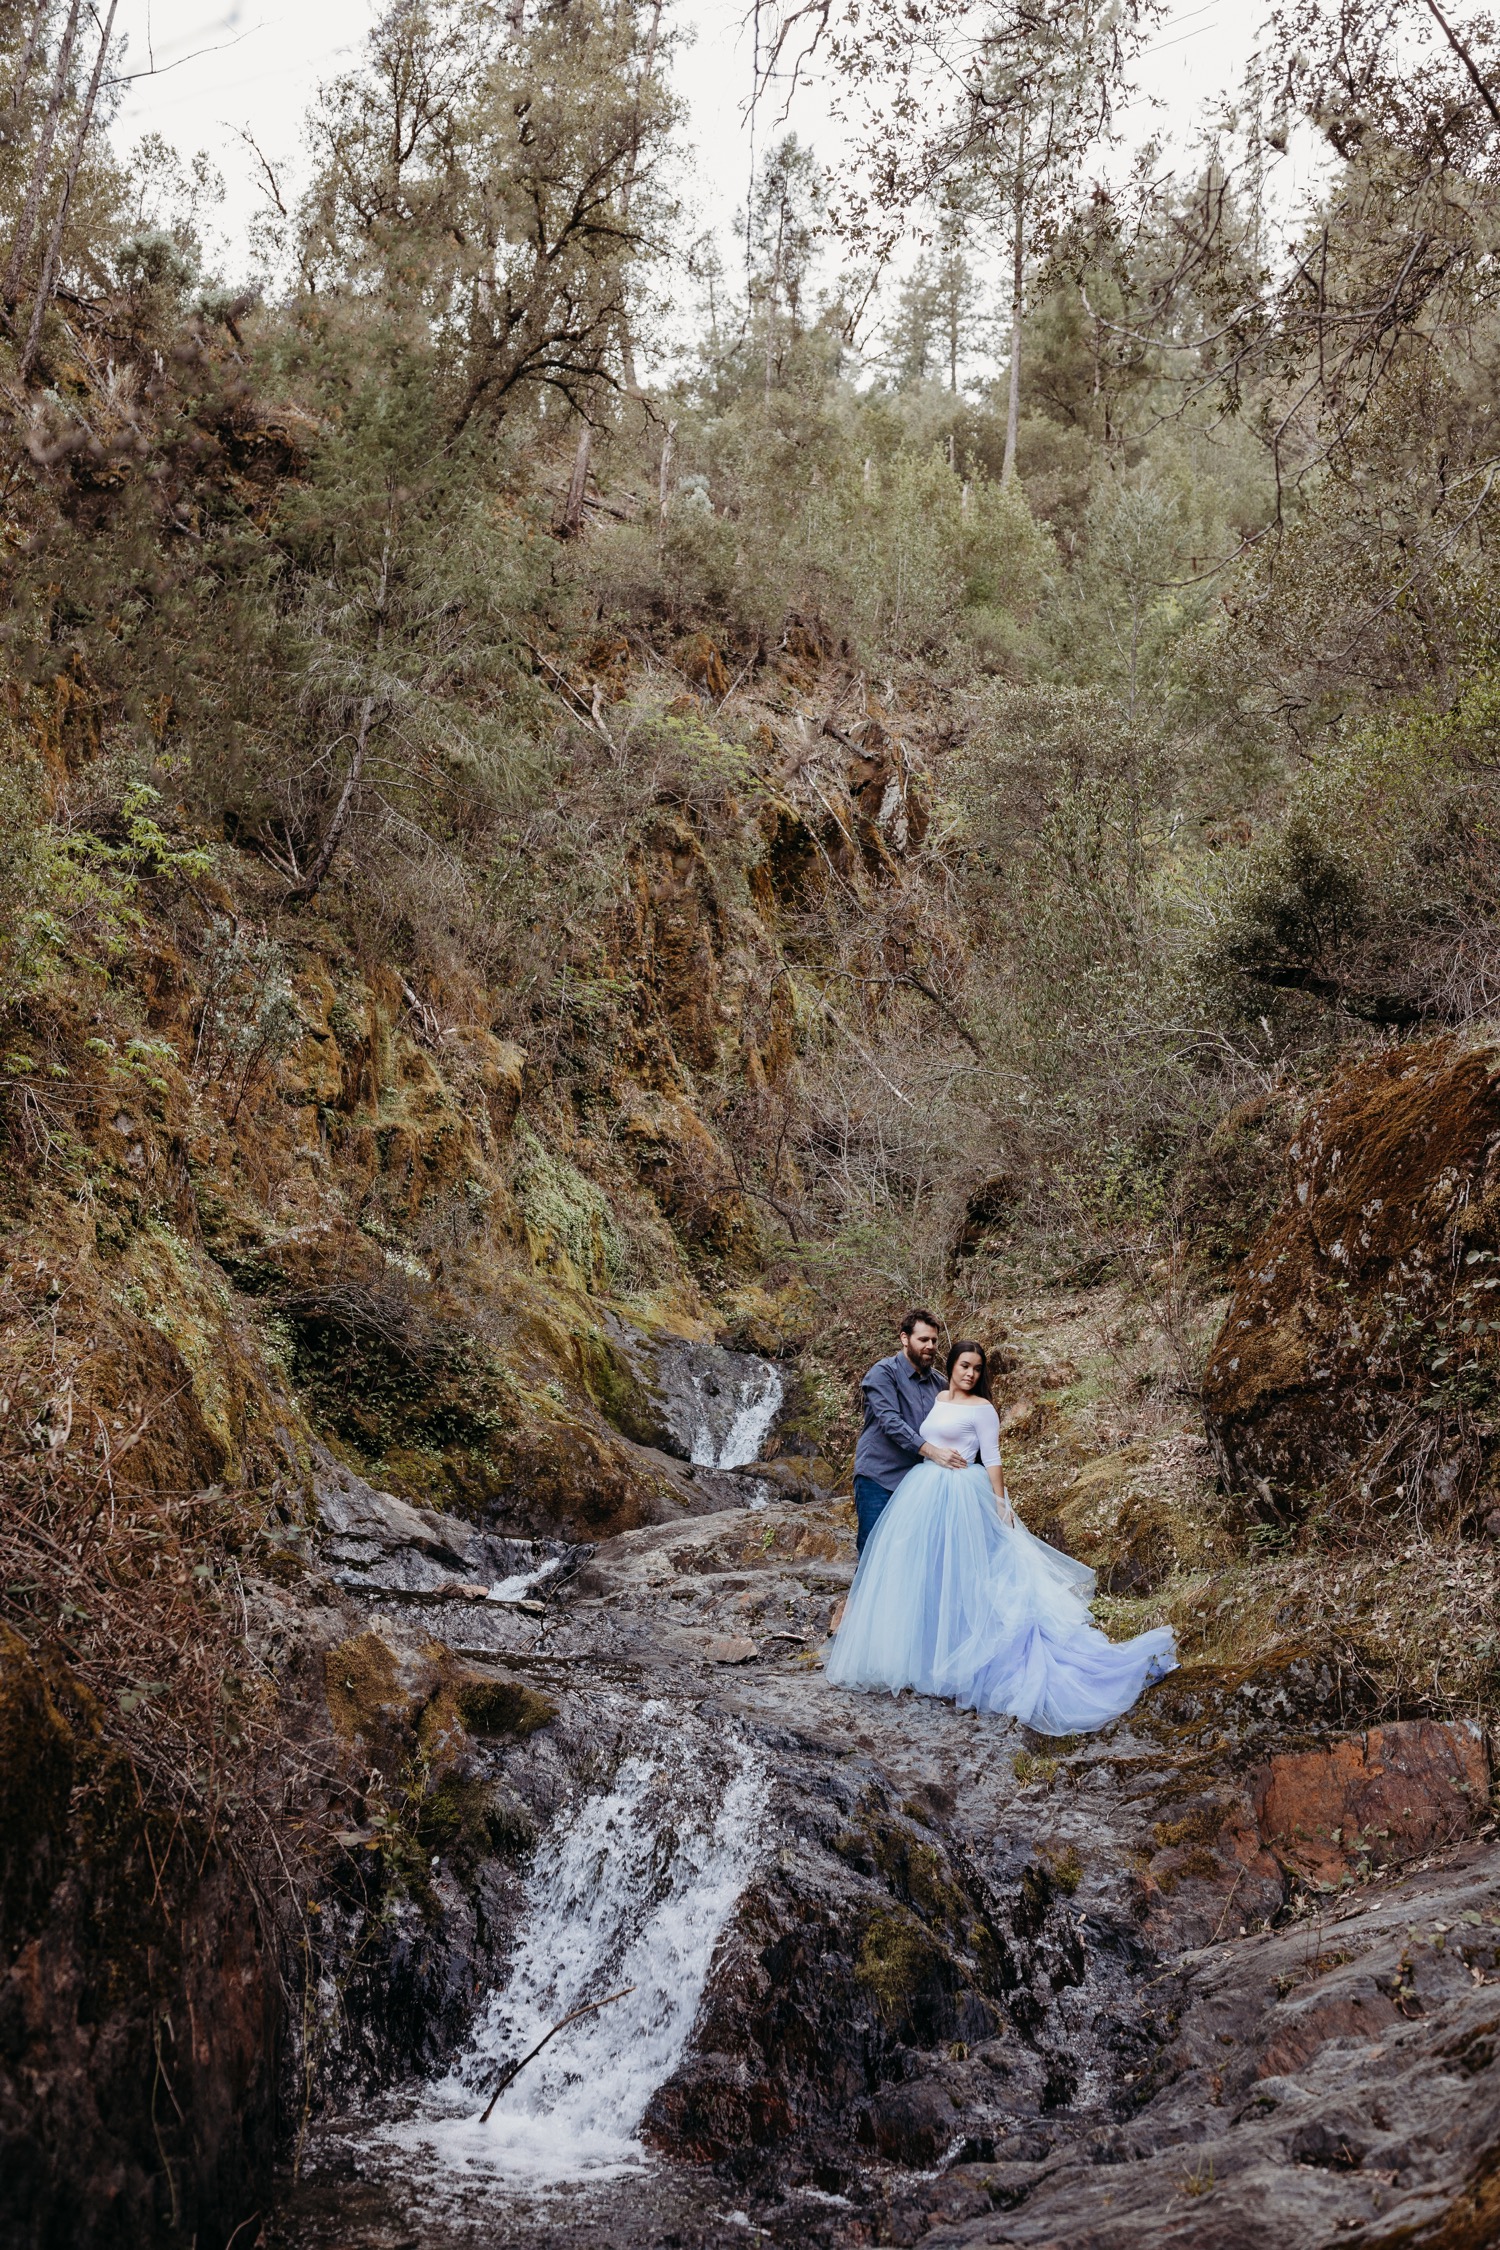 Couple stands in an embrace above a waterfall with the woman in a large light blue tulle skirt during their American River engagement photoshoot.